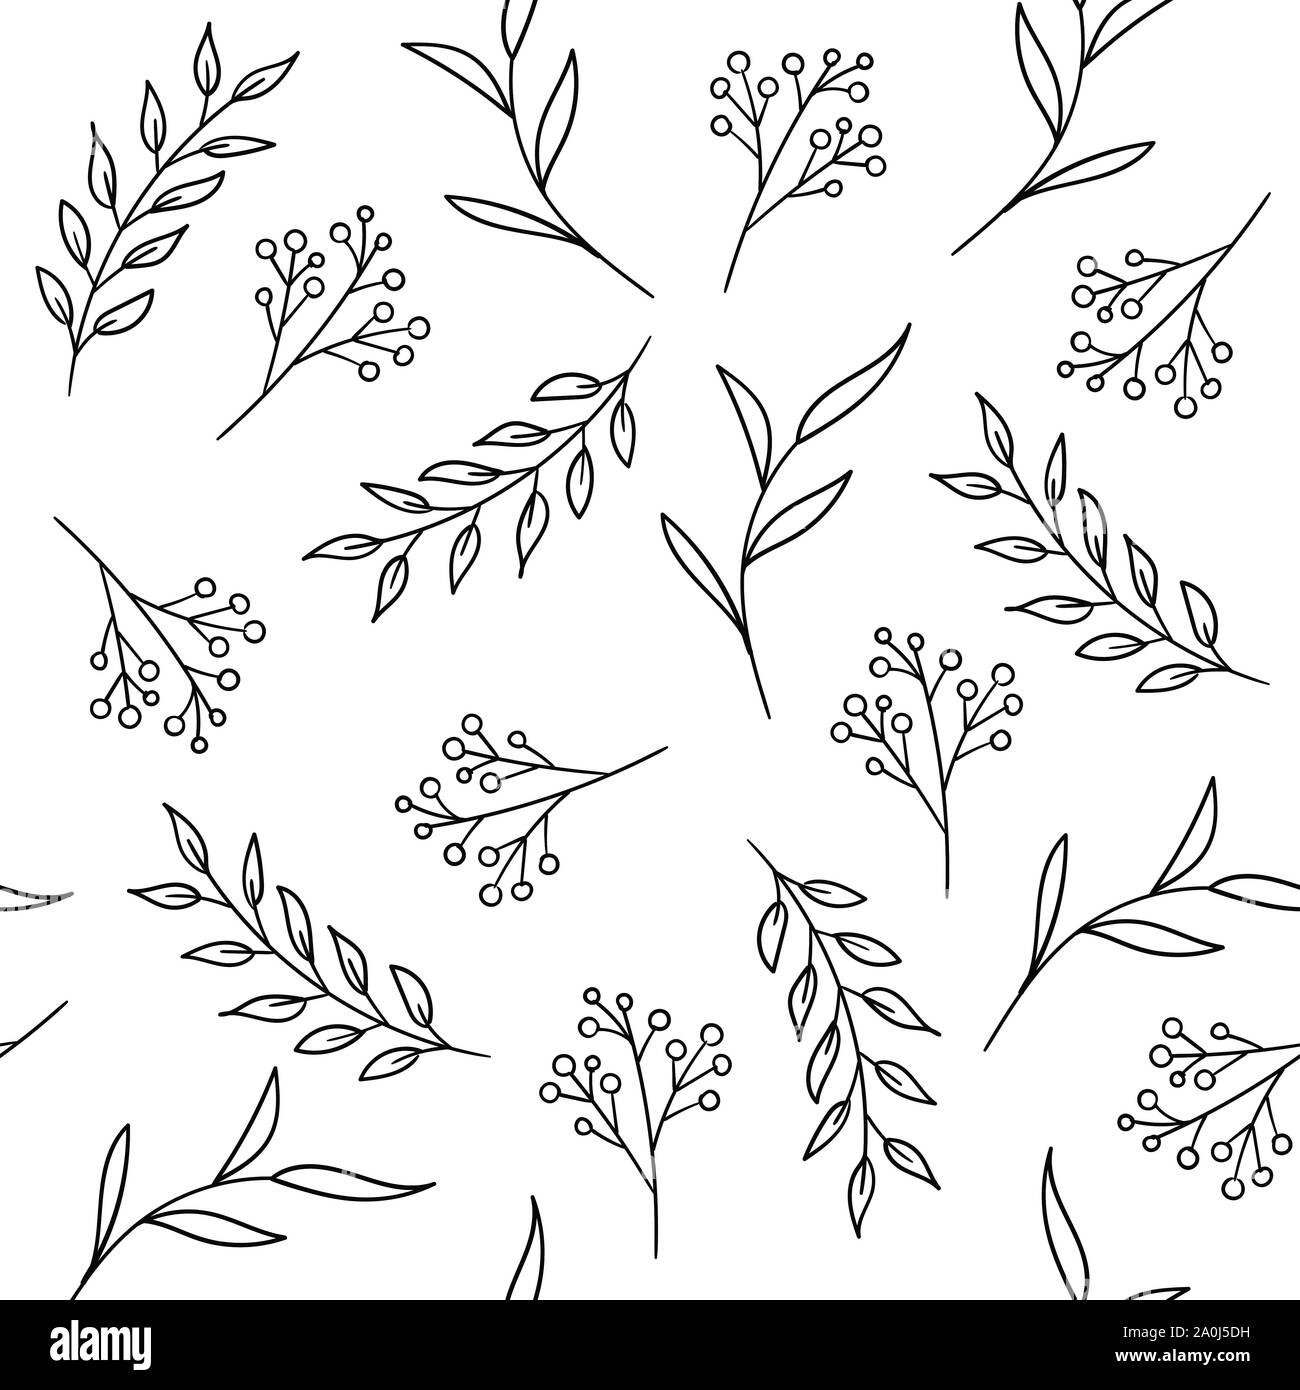 Floral seamless pattern with plants and berries Stock Vector